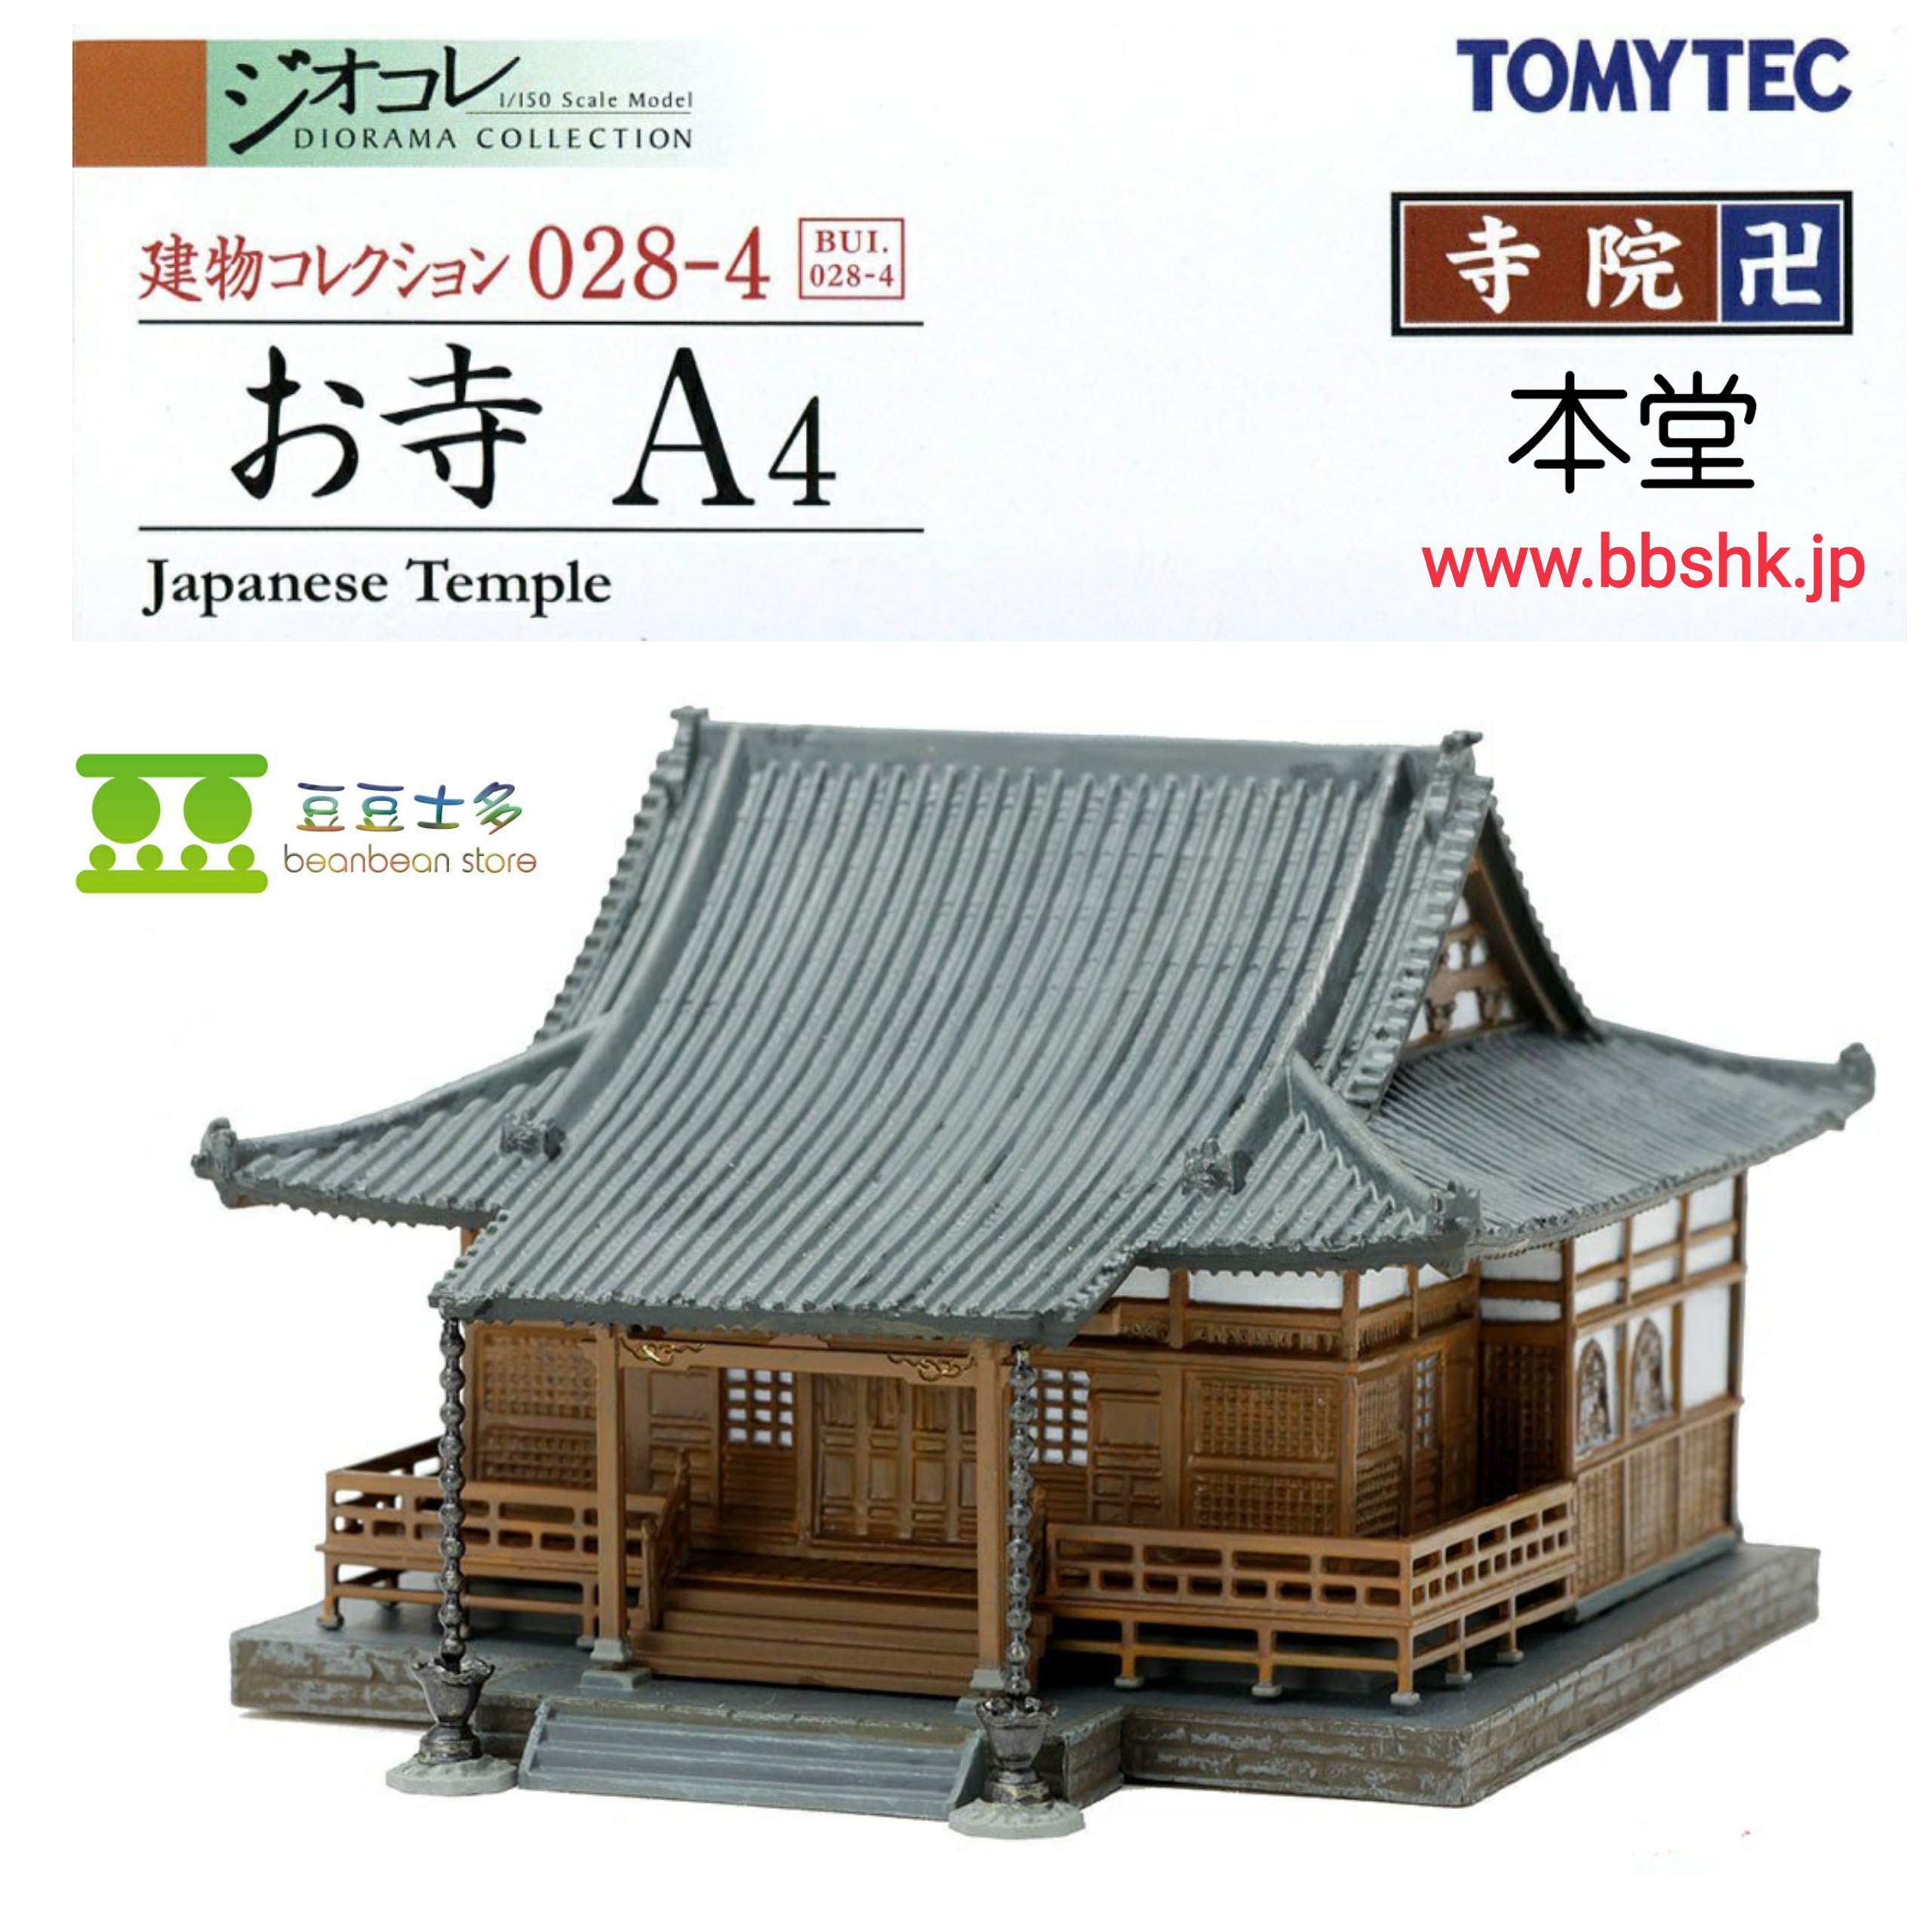 Tomytec Building Collection Kenkore 028-4 Temple A4 Main Hall Diorama Supplies